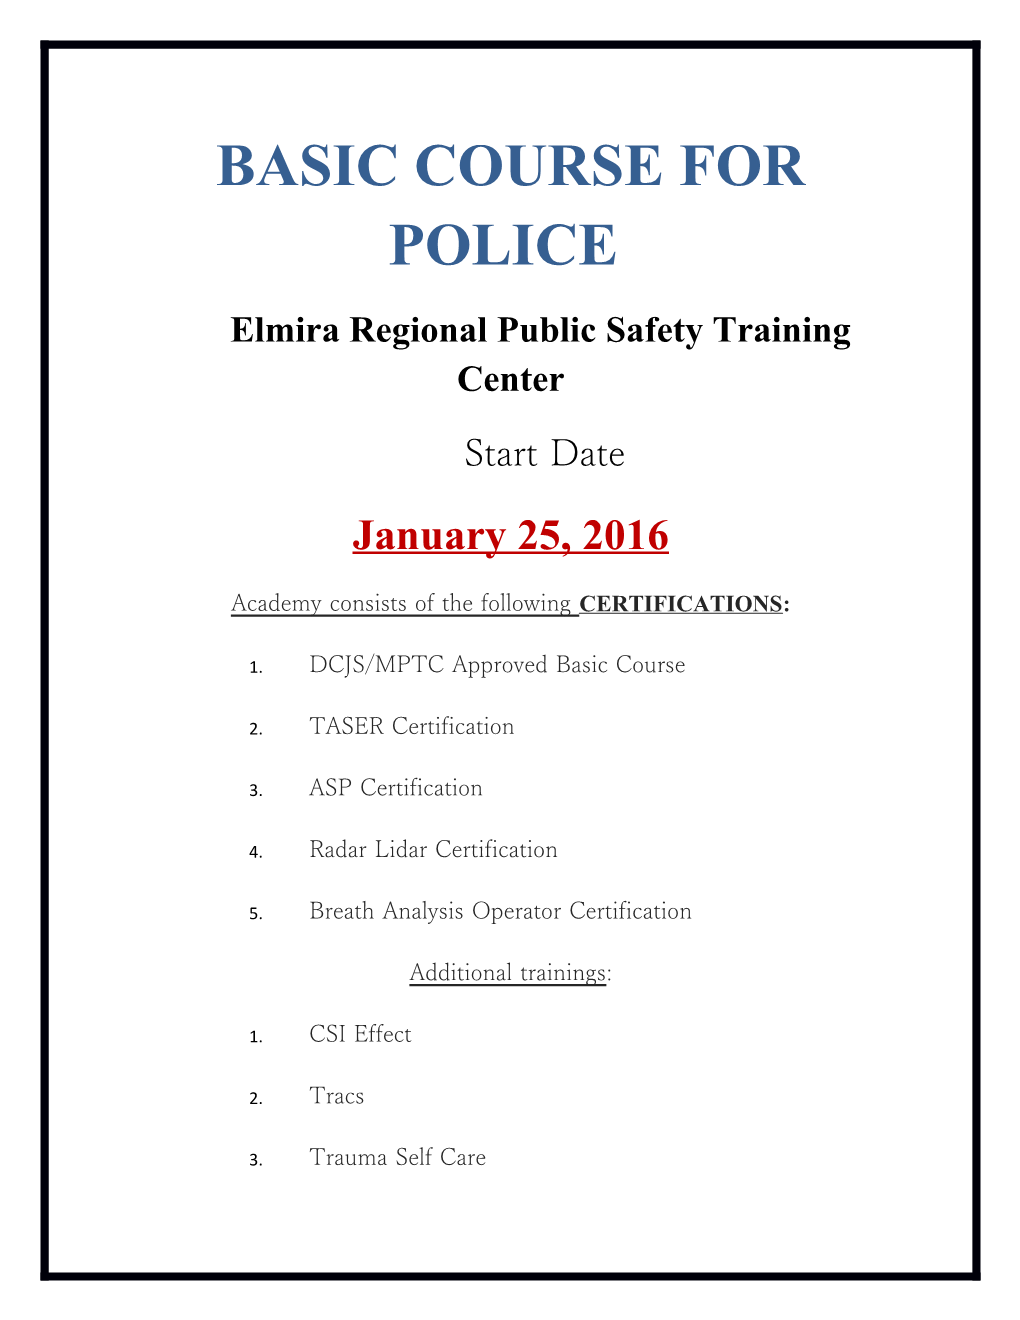 Basic Course for Police